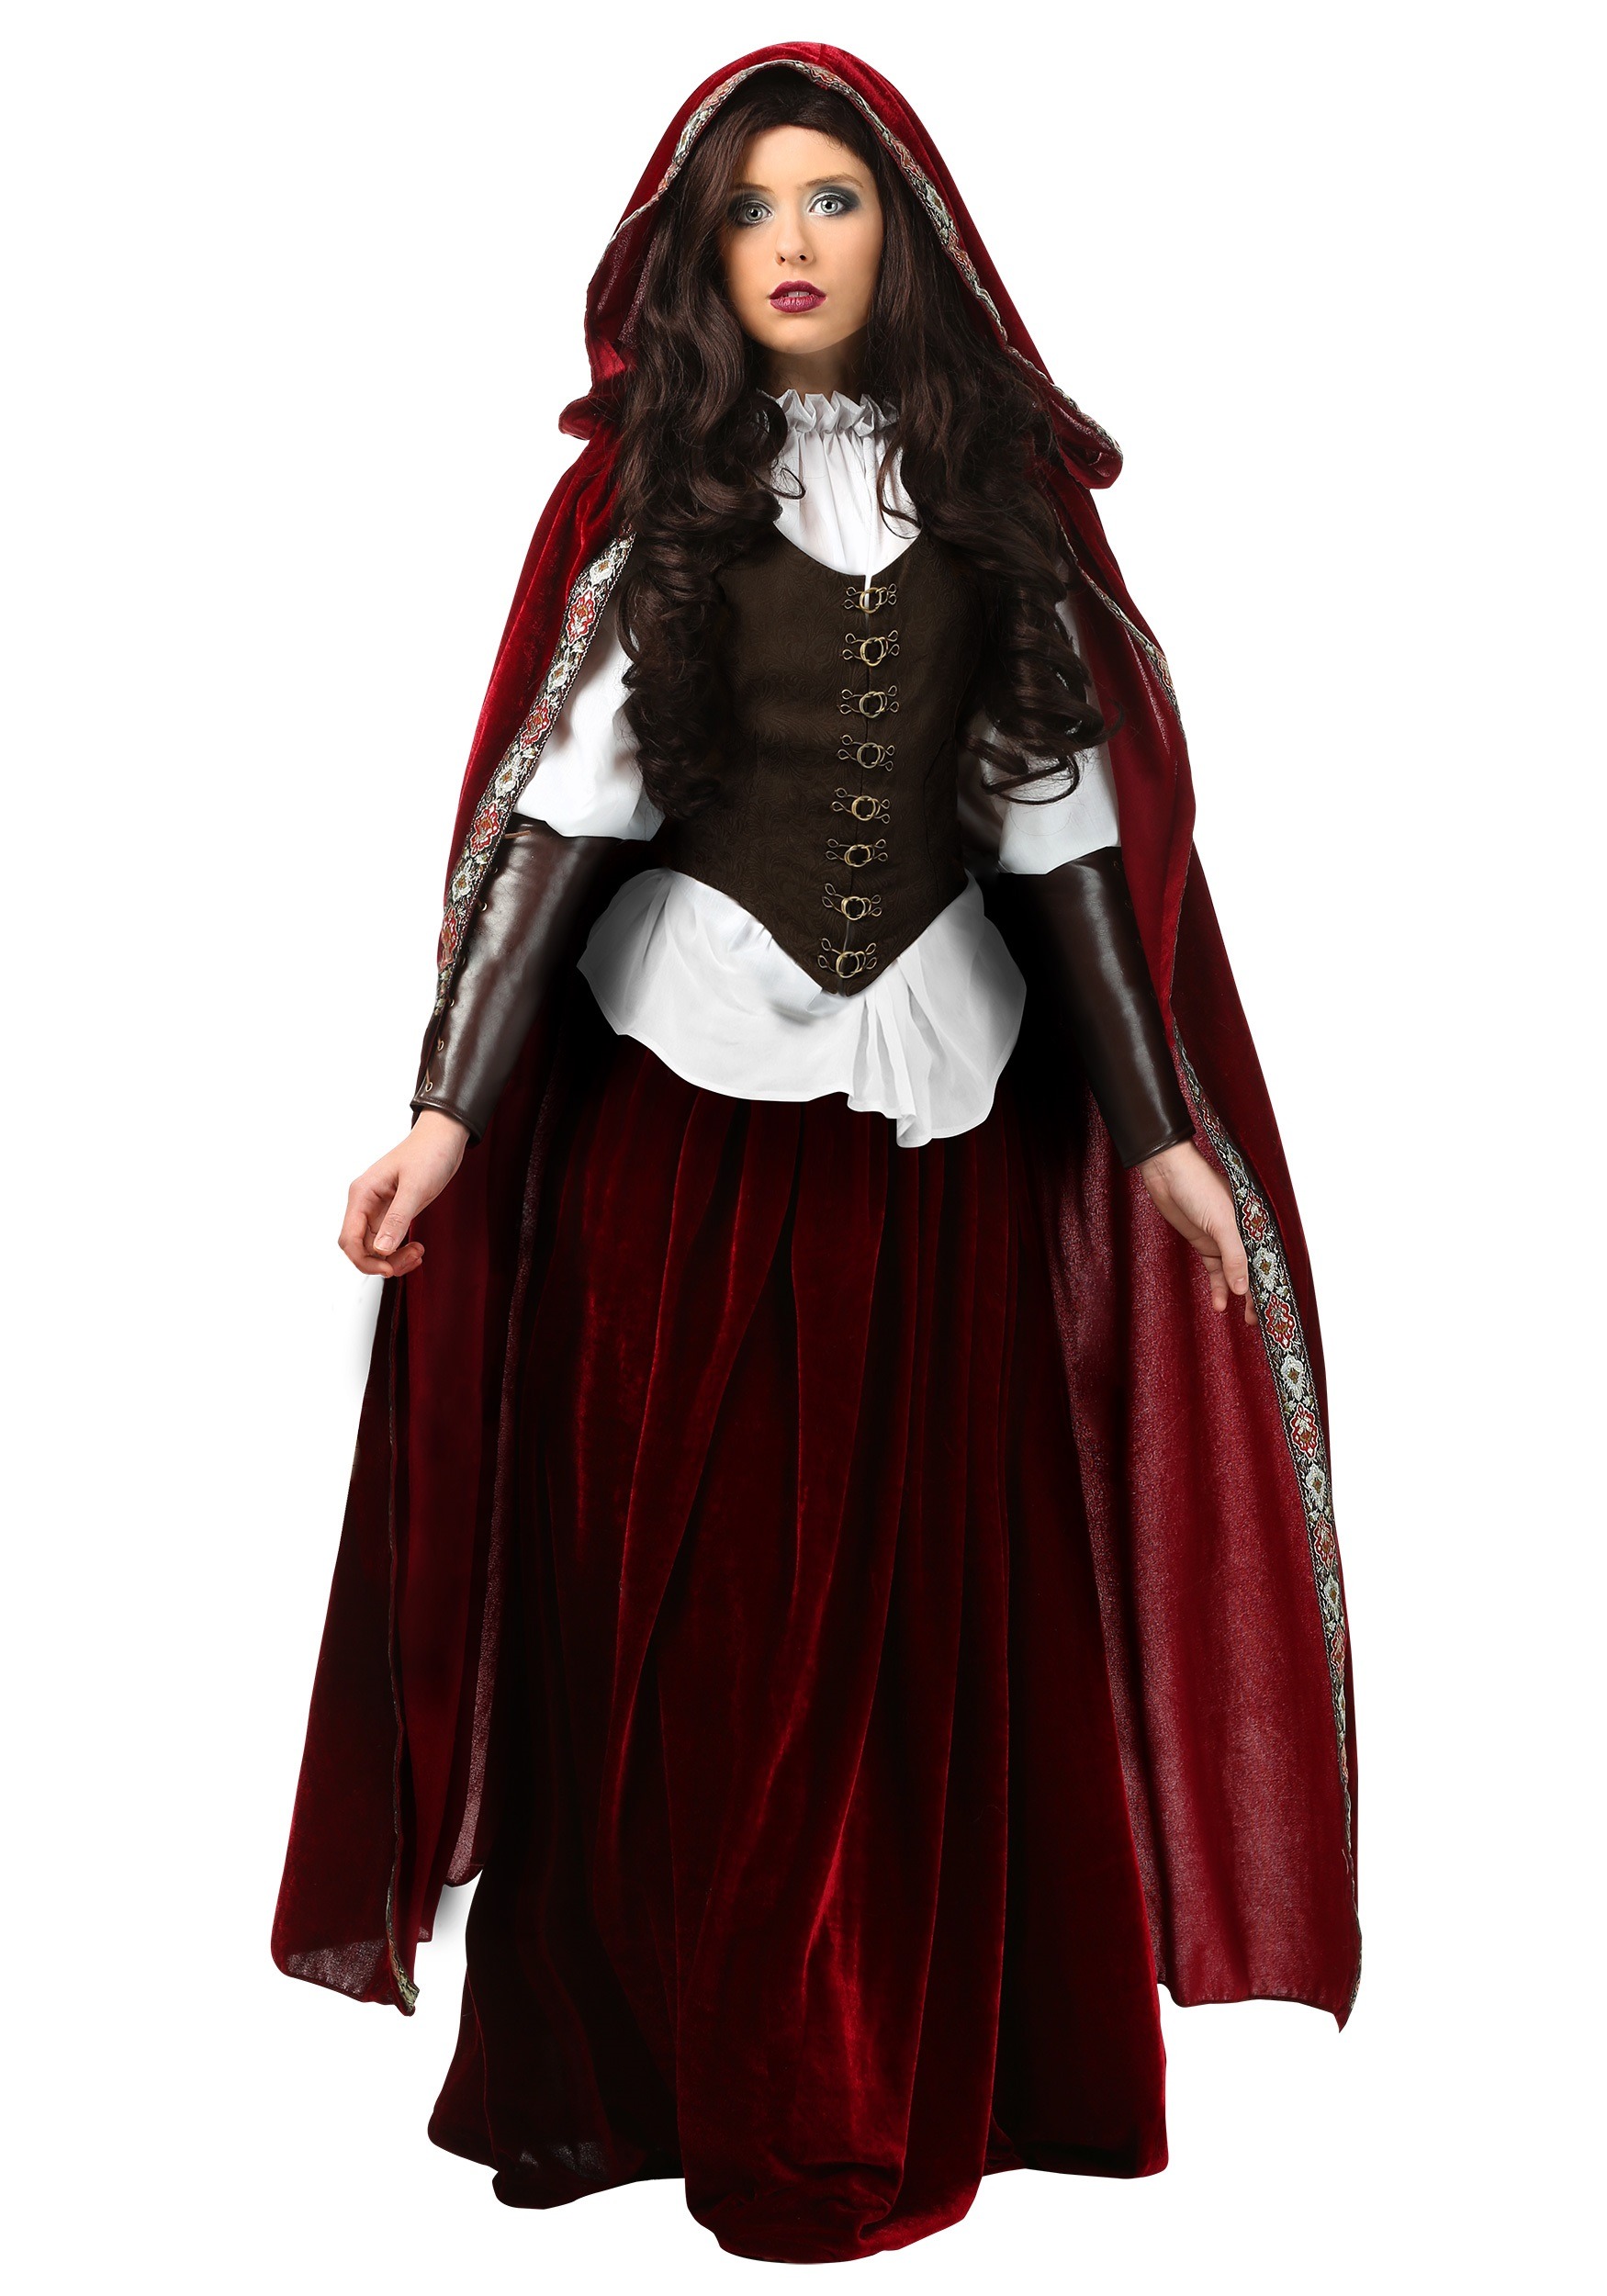 Photos - Fancy Dress Deluxe FUN Costumes  Red Riding Hood Plus Size Women's  Costume 